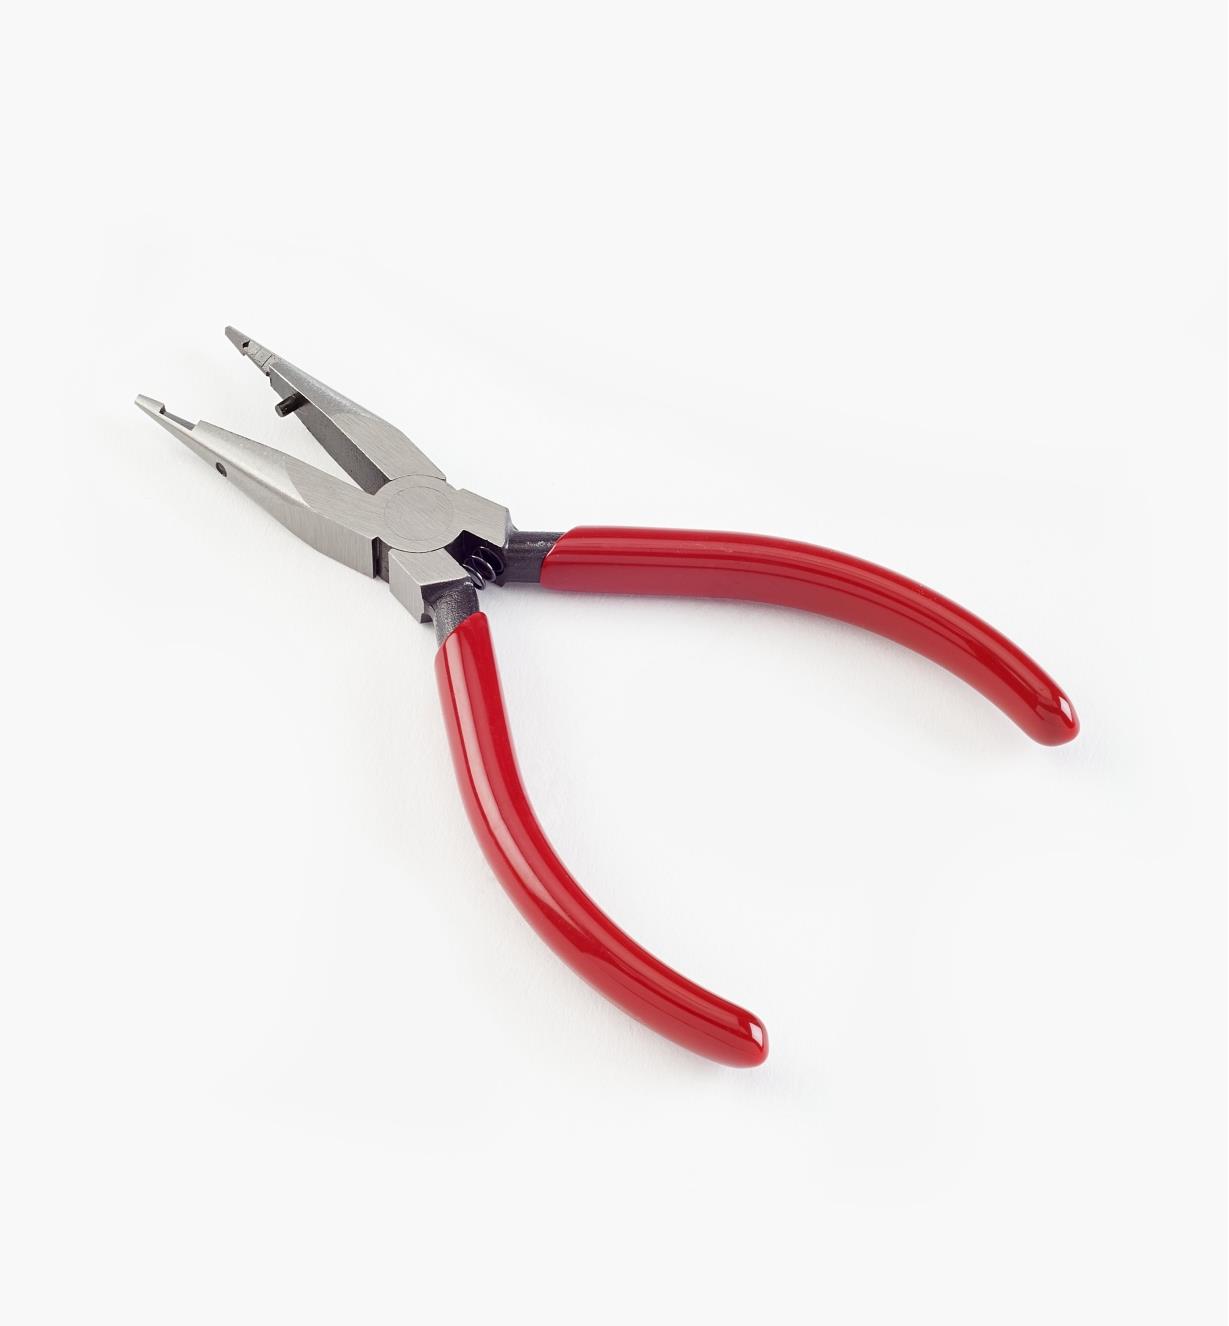 60K2302 - Mini Needle-Nose Pliers with Tip Cutters